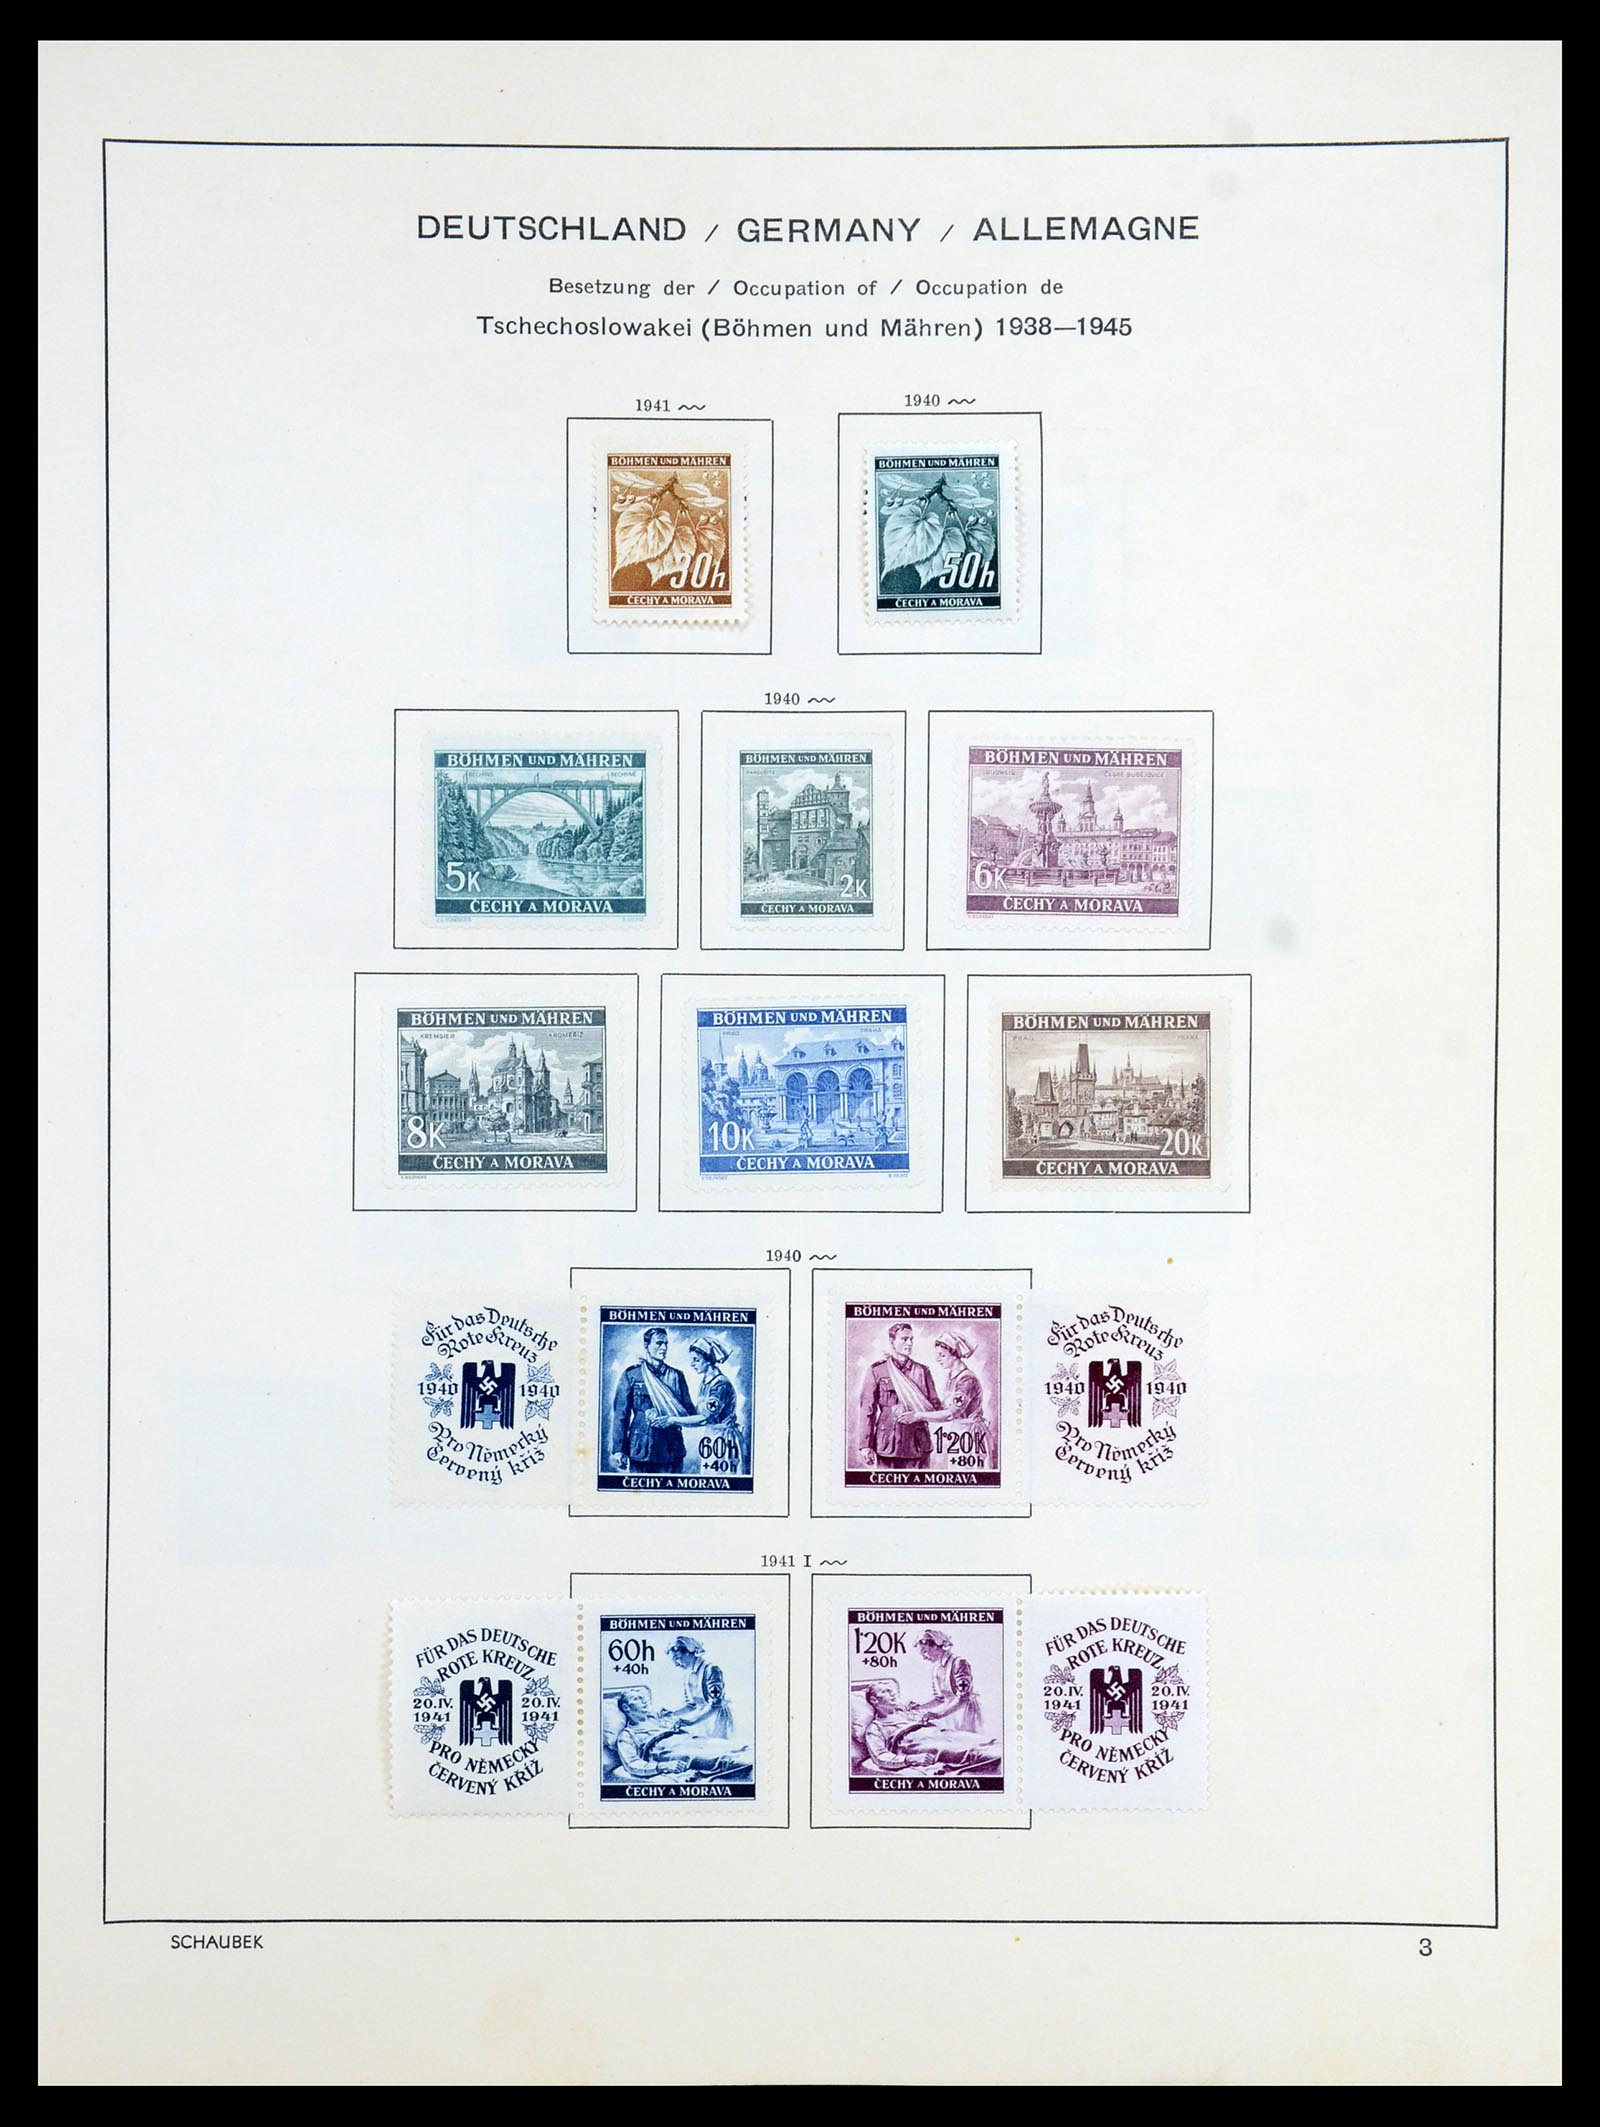 35964 023 - Stamp collection 35964 Germany occupations WW II 1939-1945.